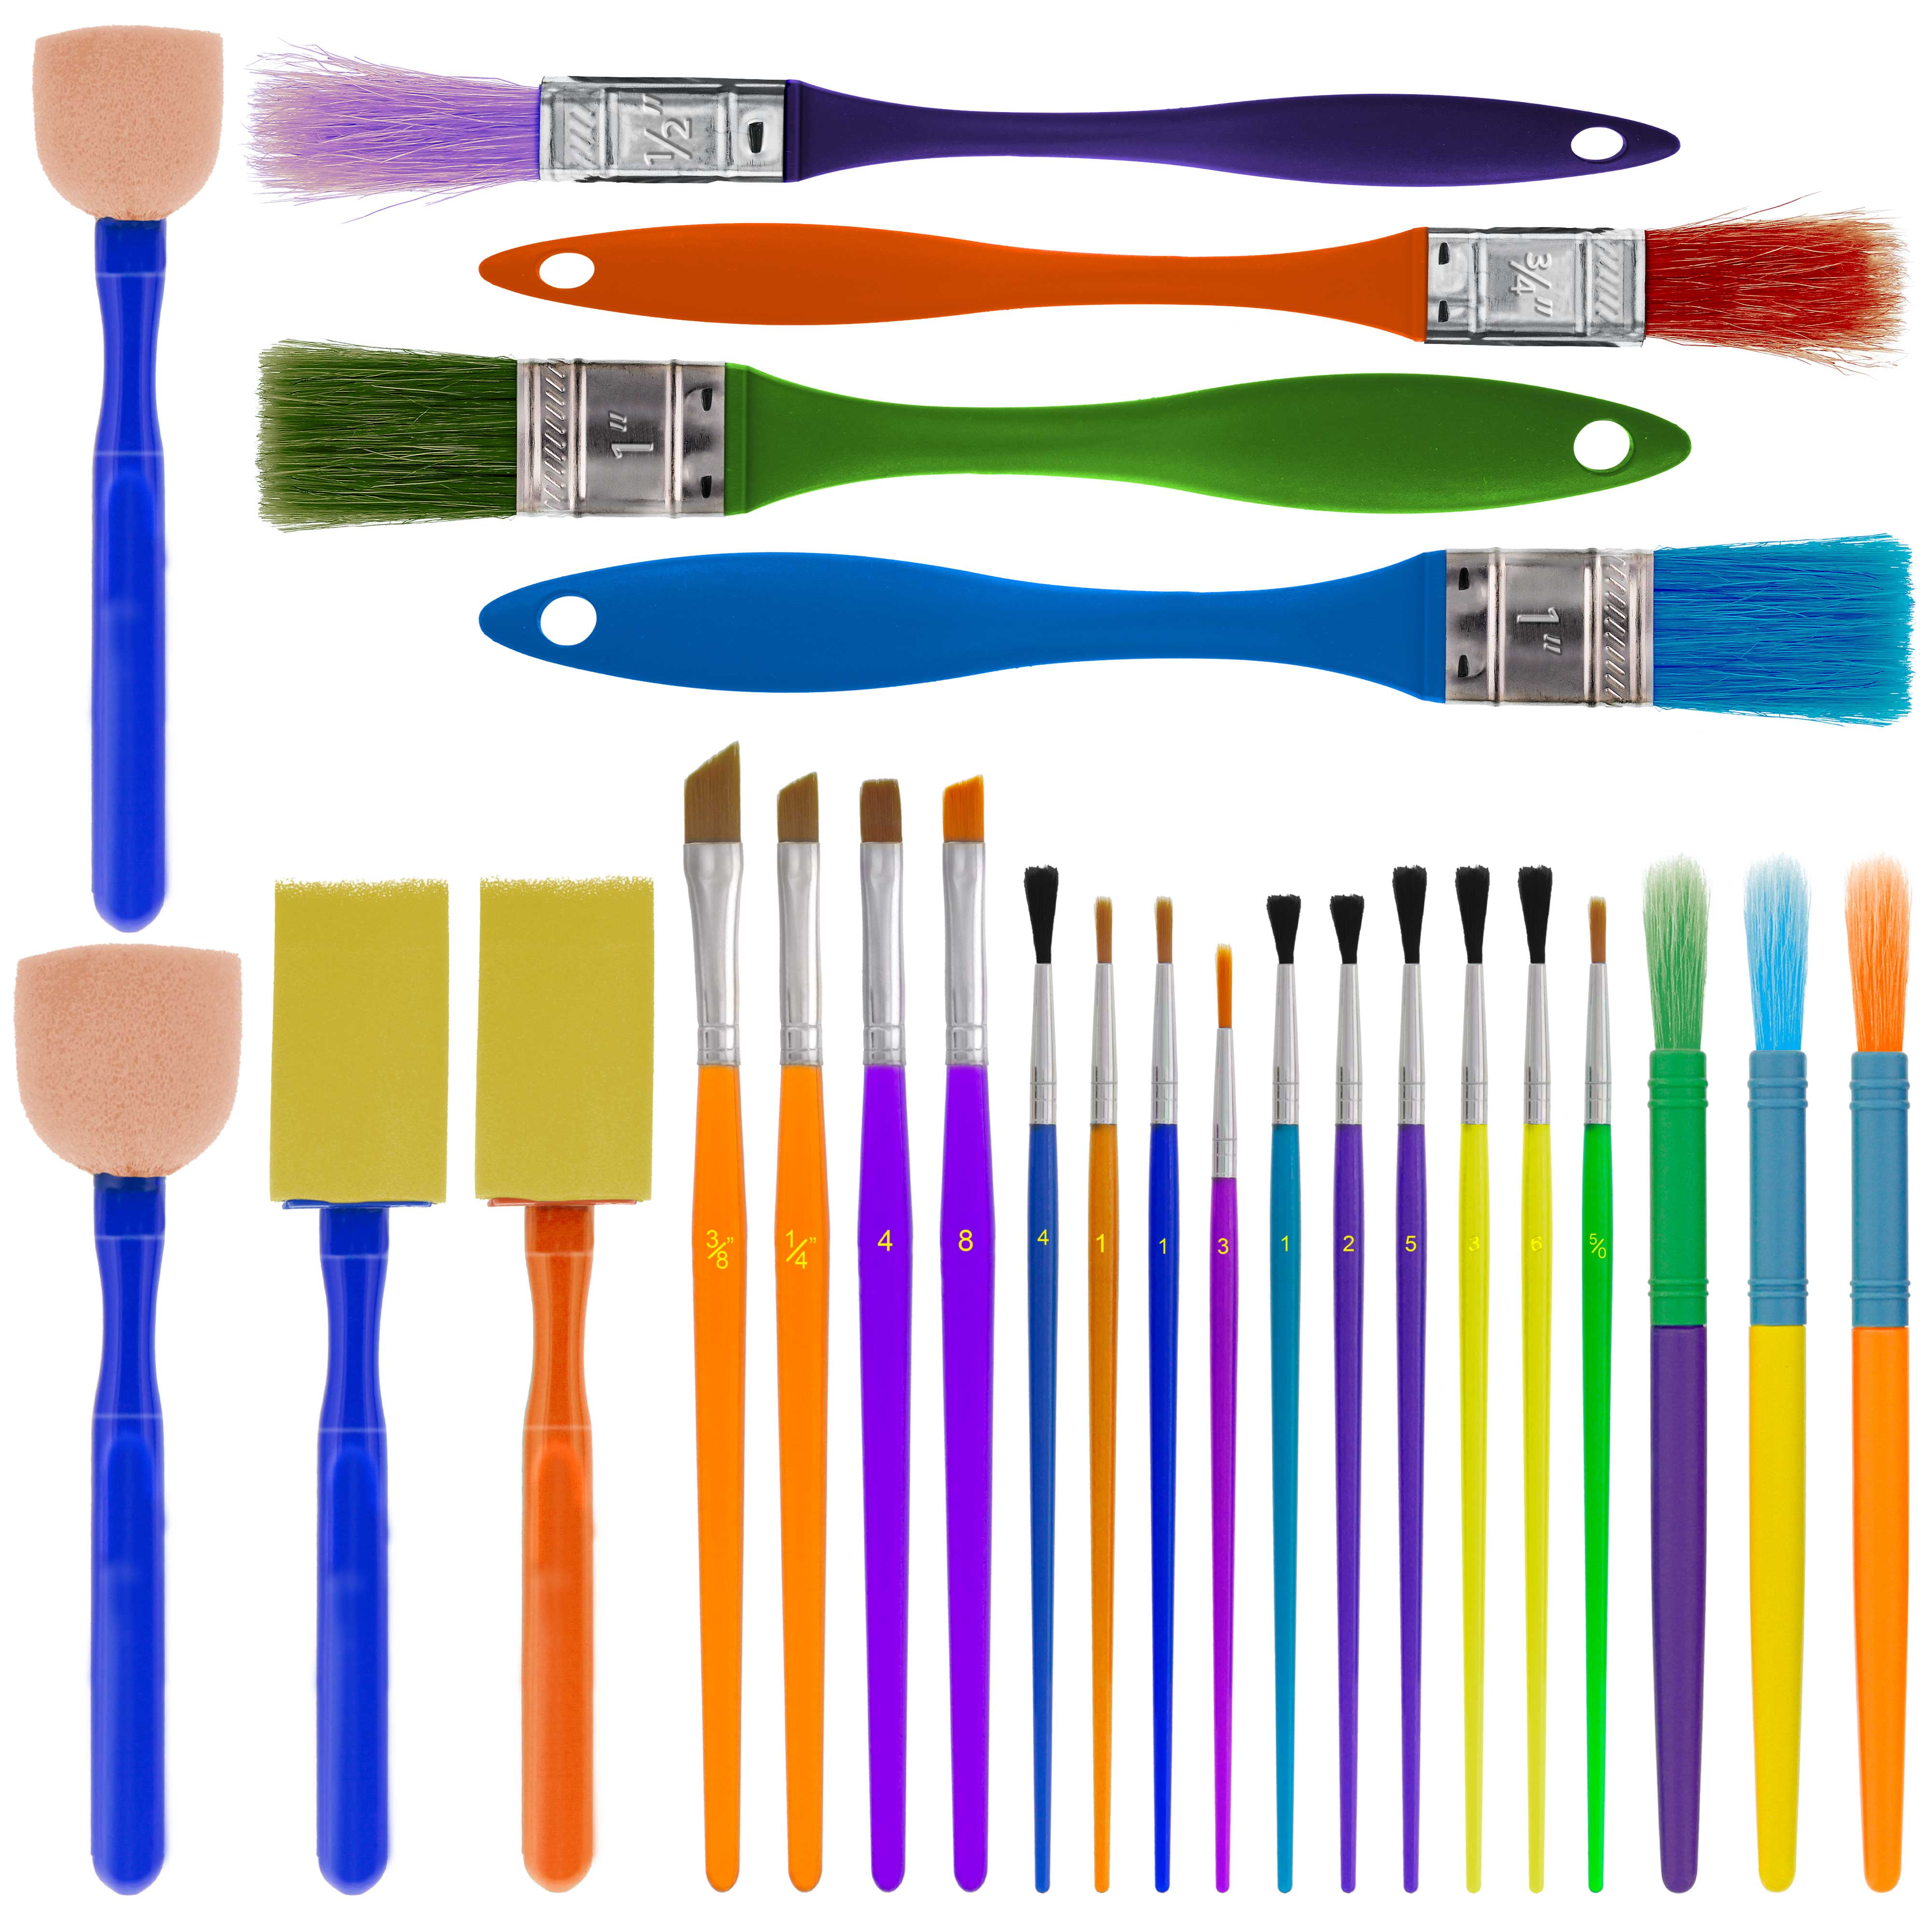 Assorted Kids Paint Brushes - 10 Piece Set